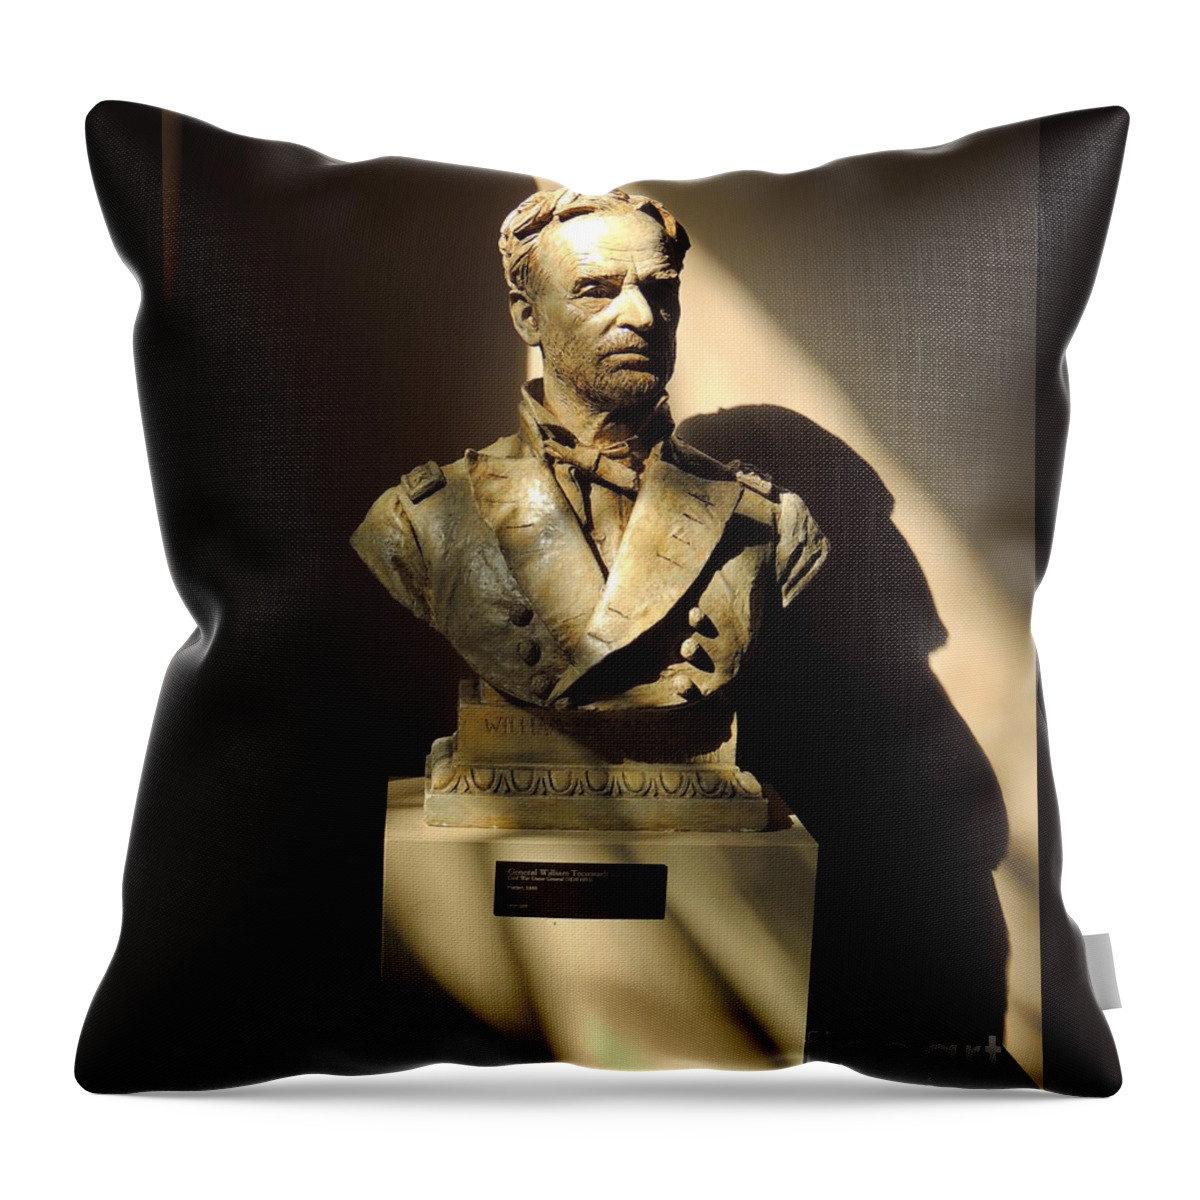 Sculpture Throw Pillow featuring the photograph Ulysses S Grant by Marcia Lee Jones